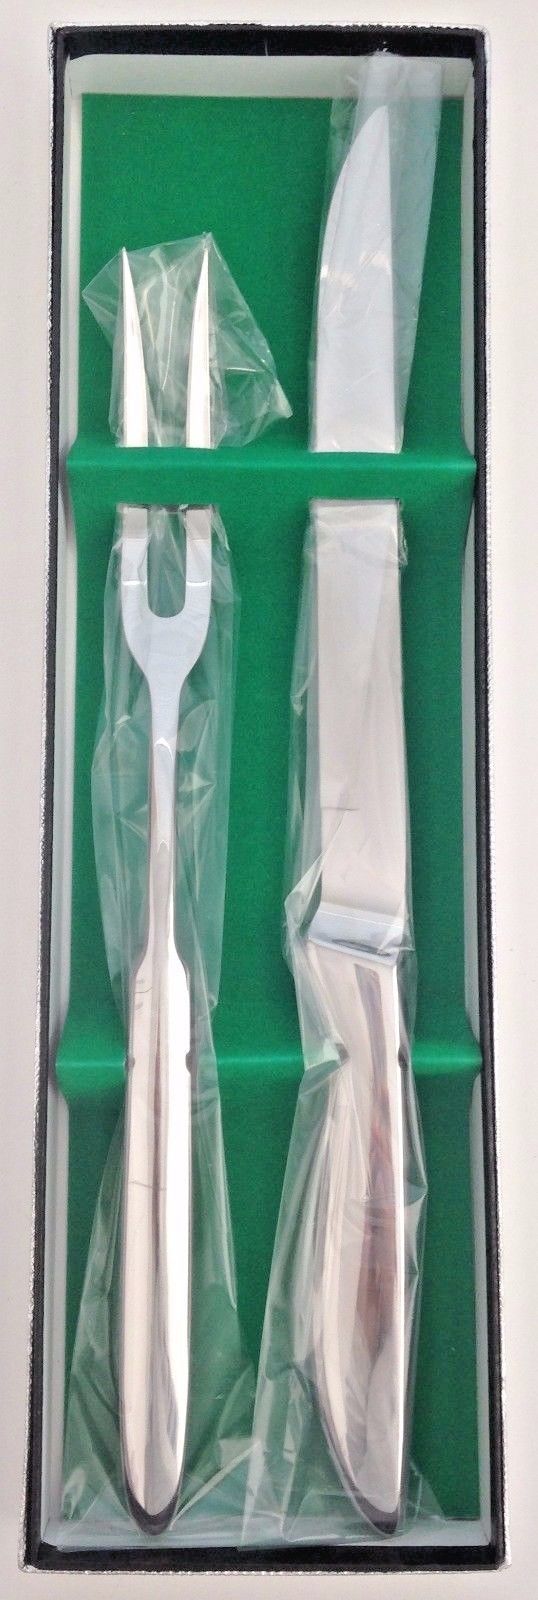 Coast M300 2 Piece Masterpiece Stainless Steel Cutlery Carving Set Japan